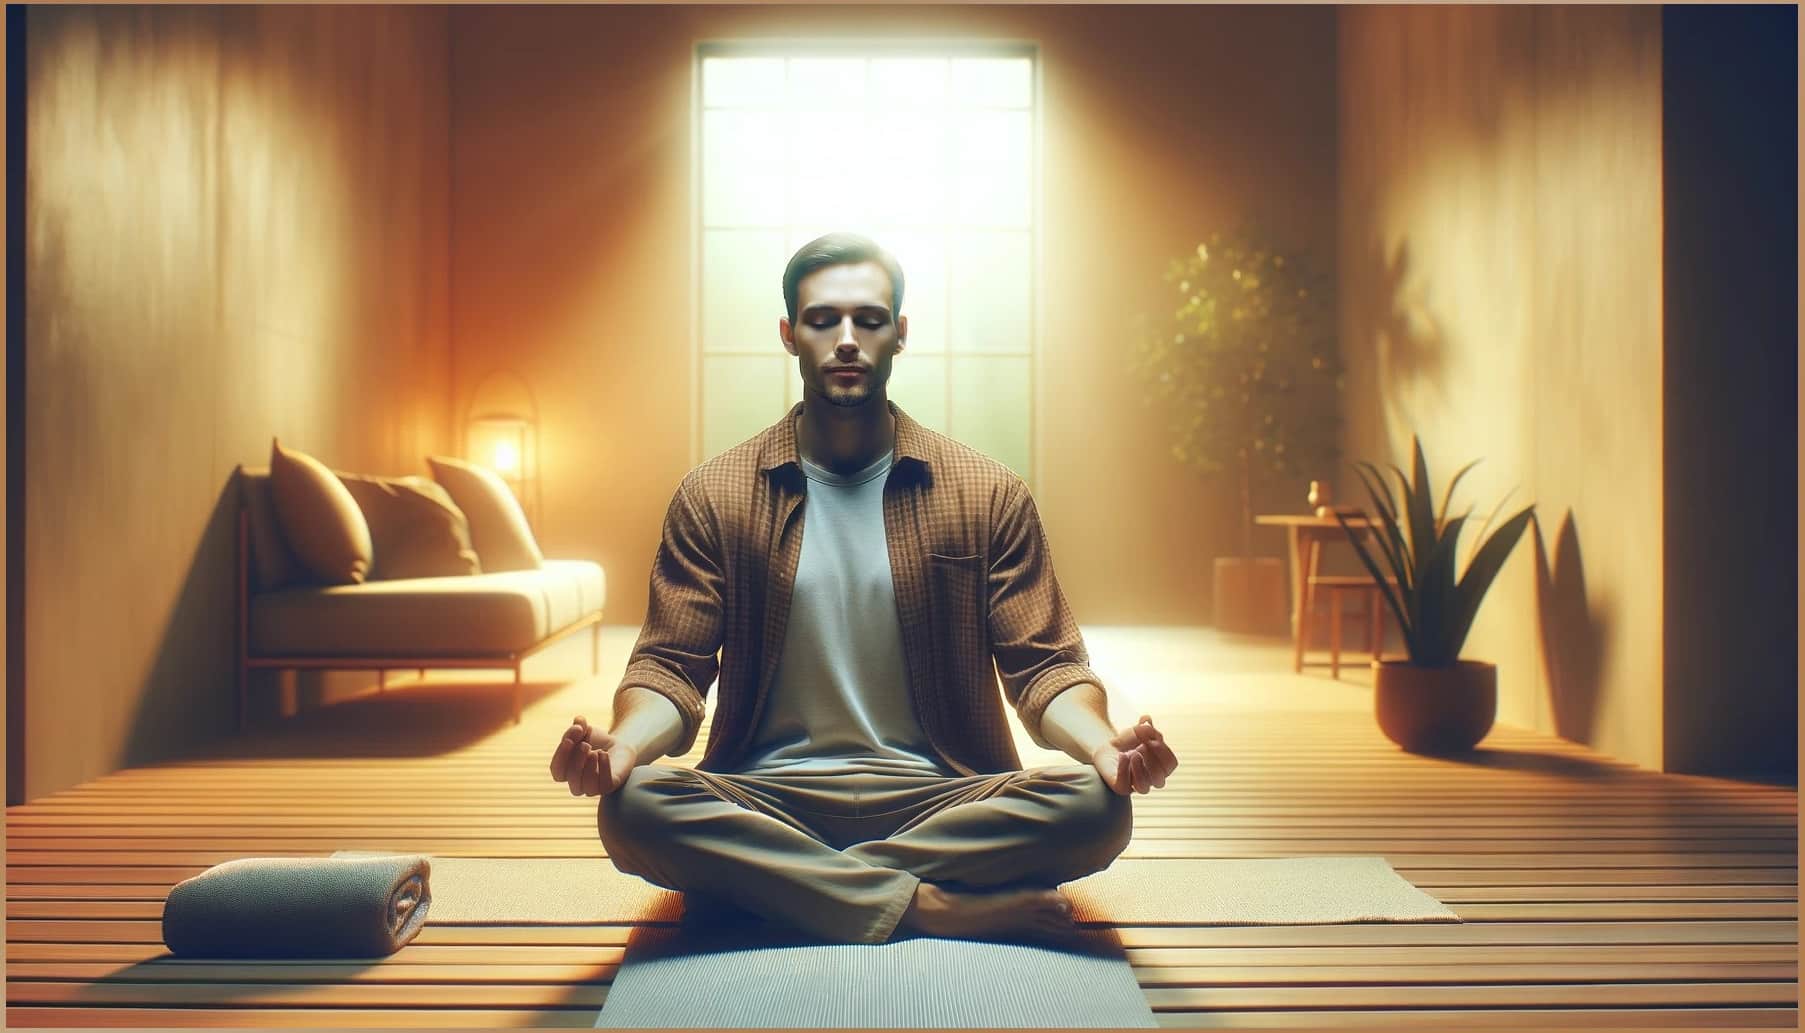 An individual practicing the Schultz relaxation technique, seated in a meditative pose, influencing the speed of the Egely Wheel in a life energy experiment, demonstrating the connection between relaxation, mental focus, and life energy manipulation.